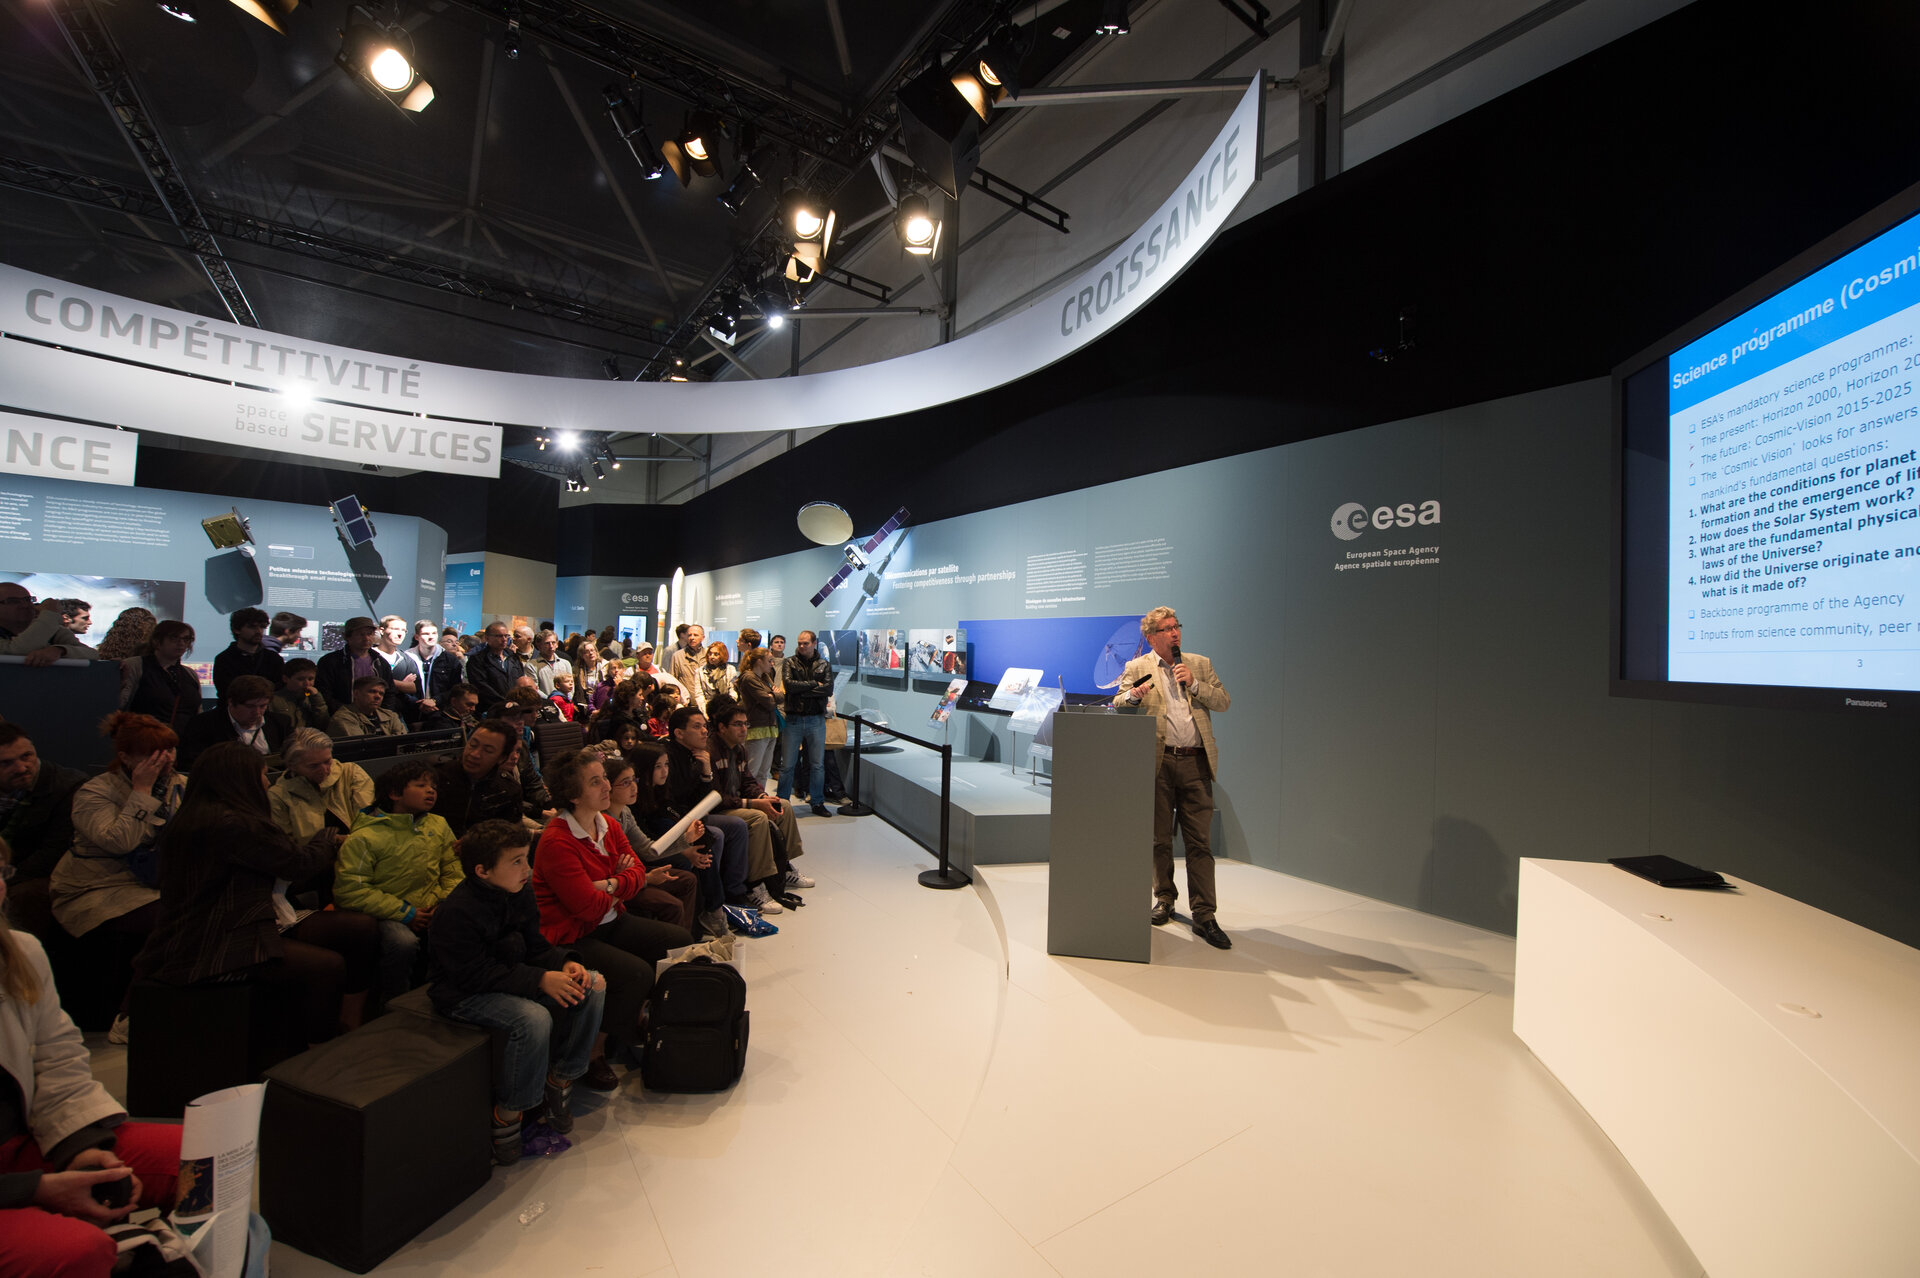 Public during the "Exploring the Solar System" lively presentation